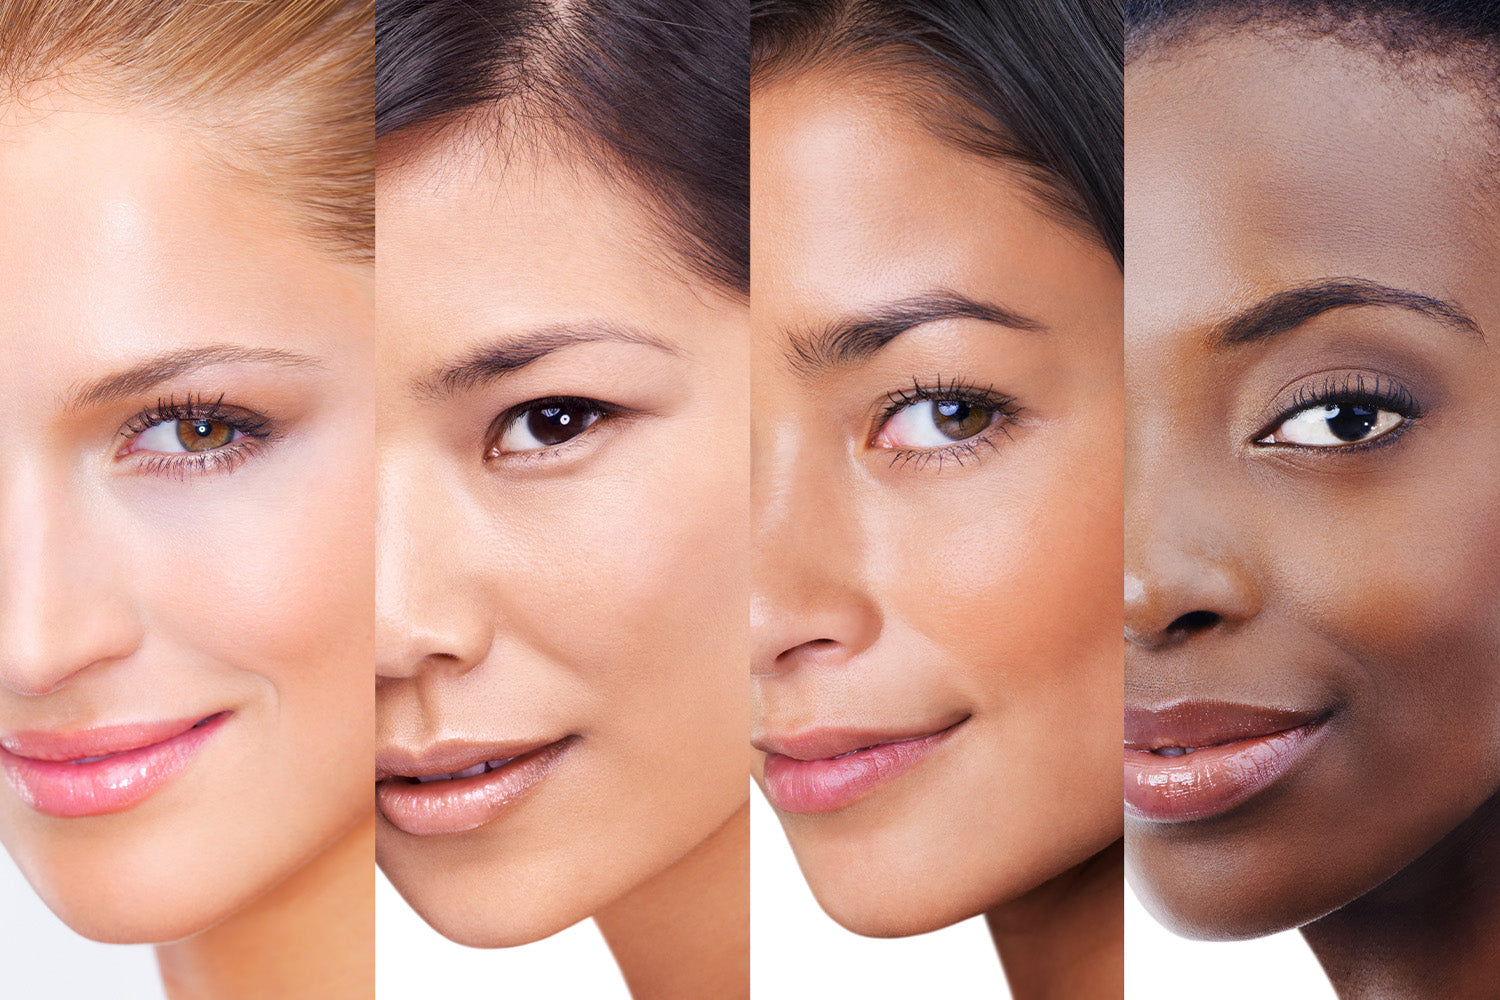 How To Improve Skin Complexion for More Even Skin Tone